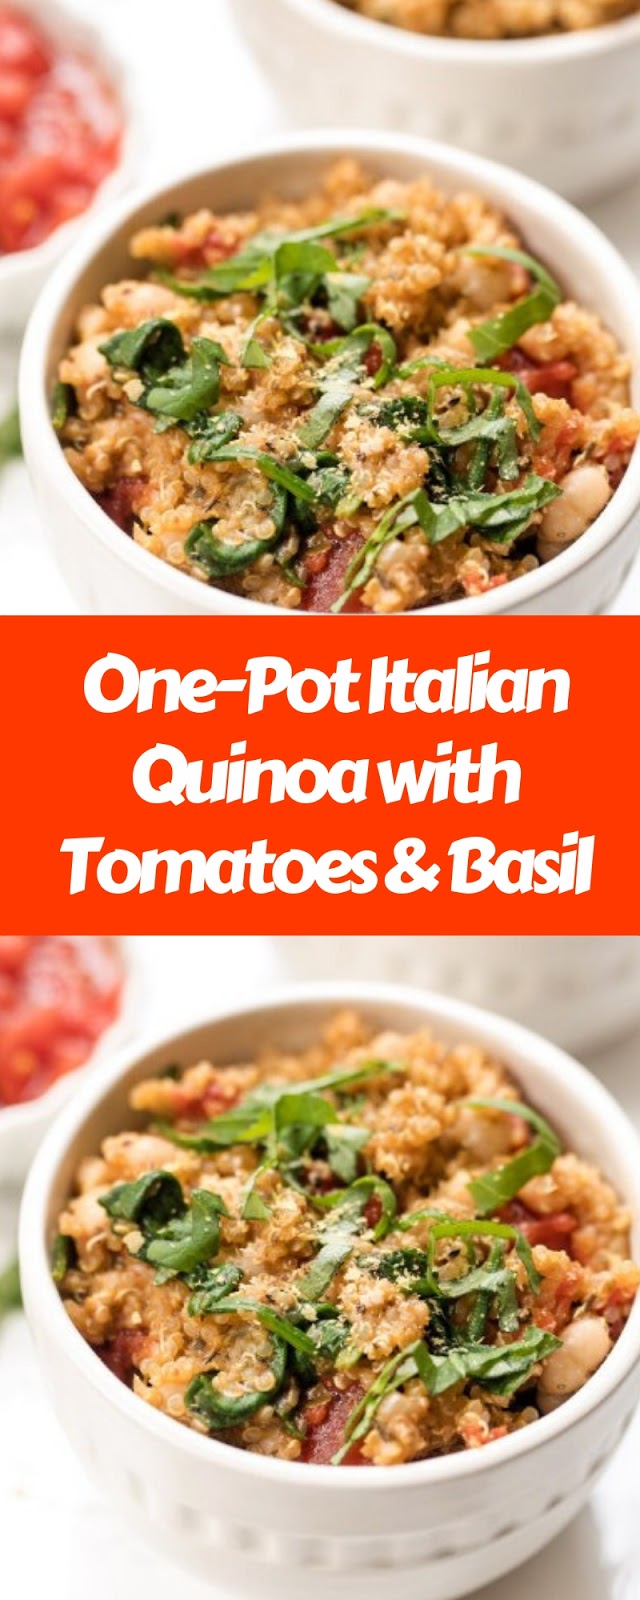 One-Pot Italian Quinoa with Tomatoes and Basil